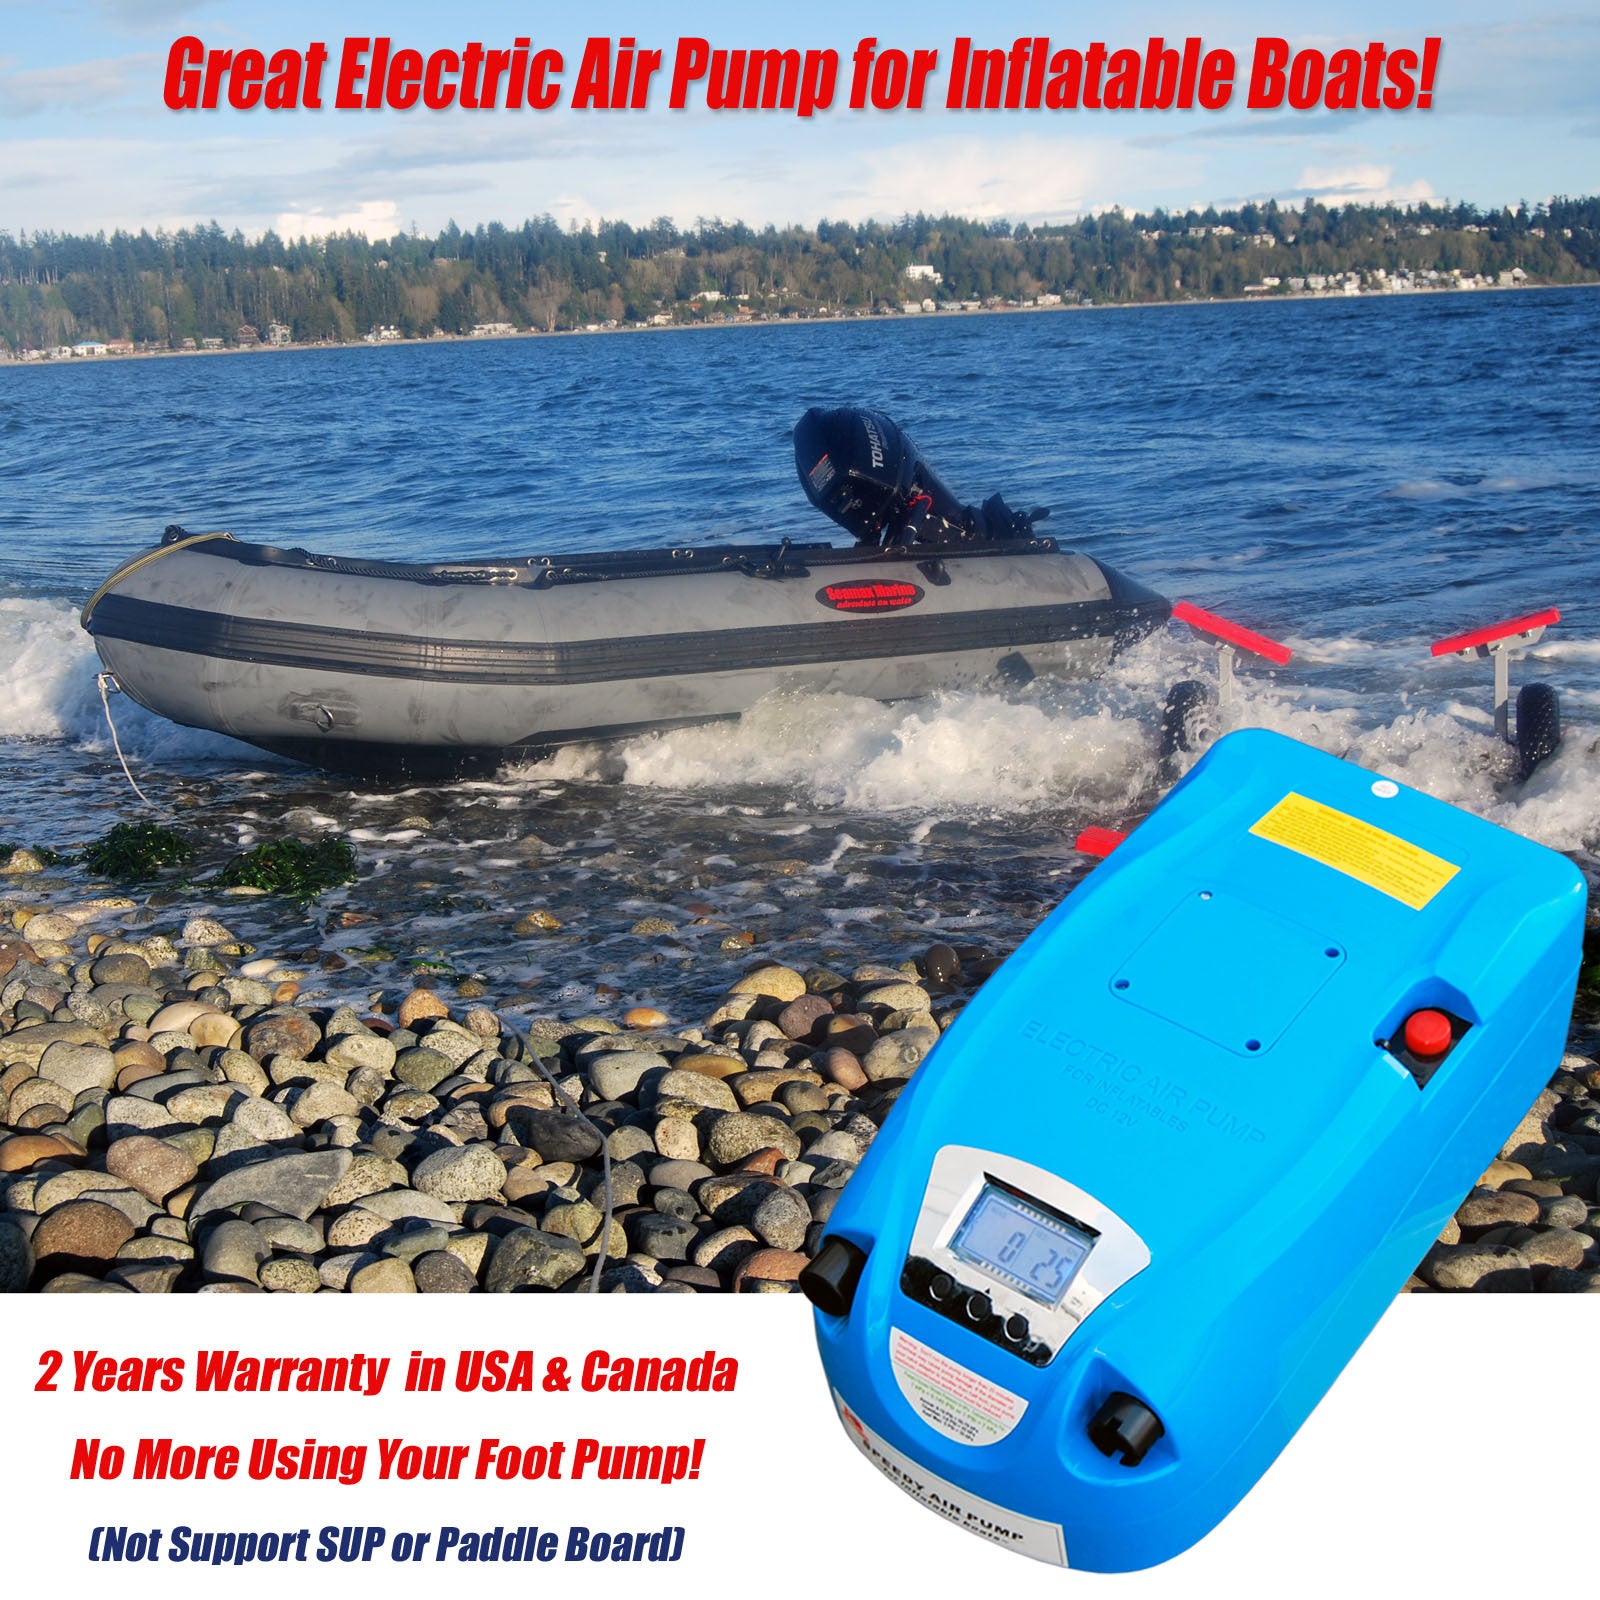 Seamax Portable Electric Air Pump 1 - 8.5 PSI for Inflatable Boats and Inflatable Kites (with Built-in 7AH Rechargeable Battery)  - Used Like New